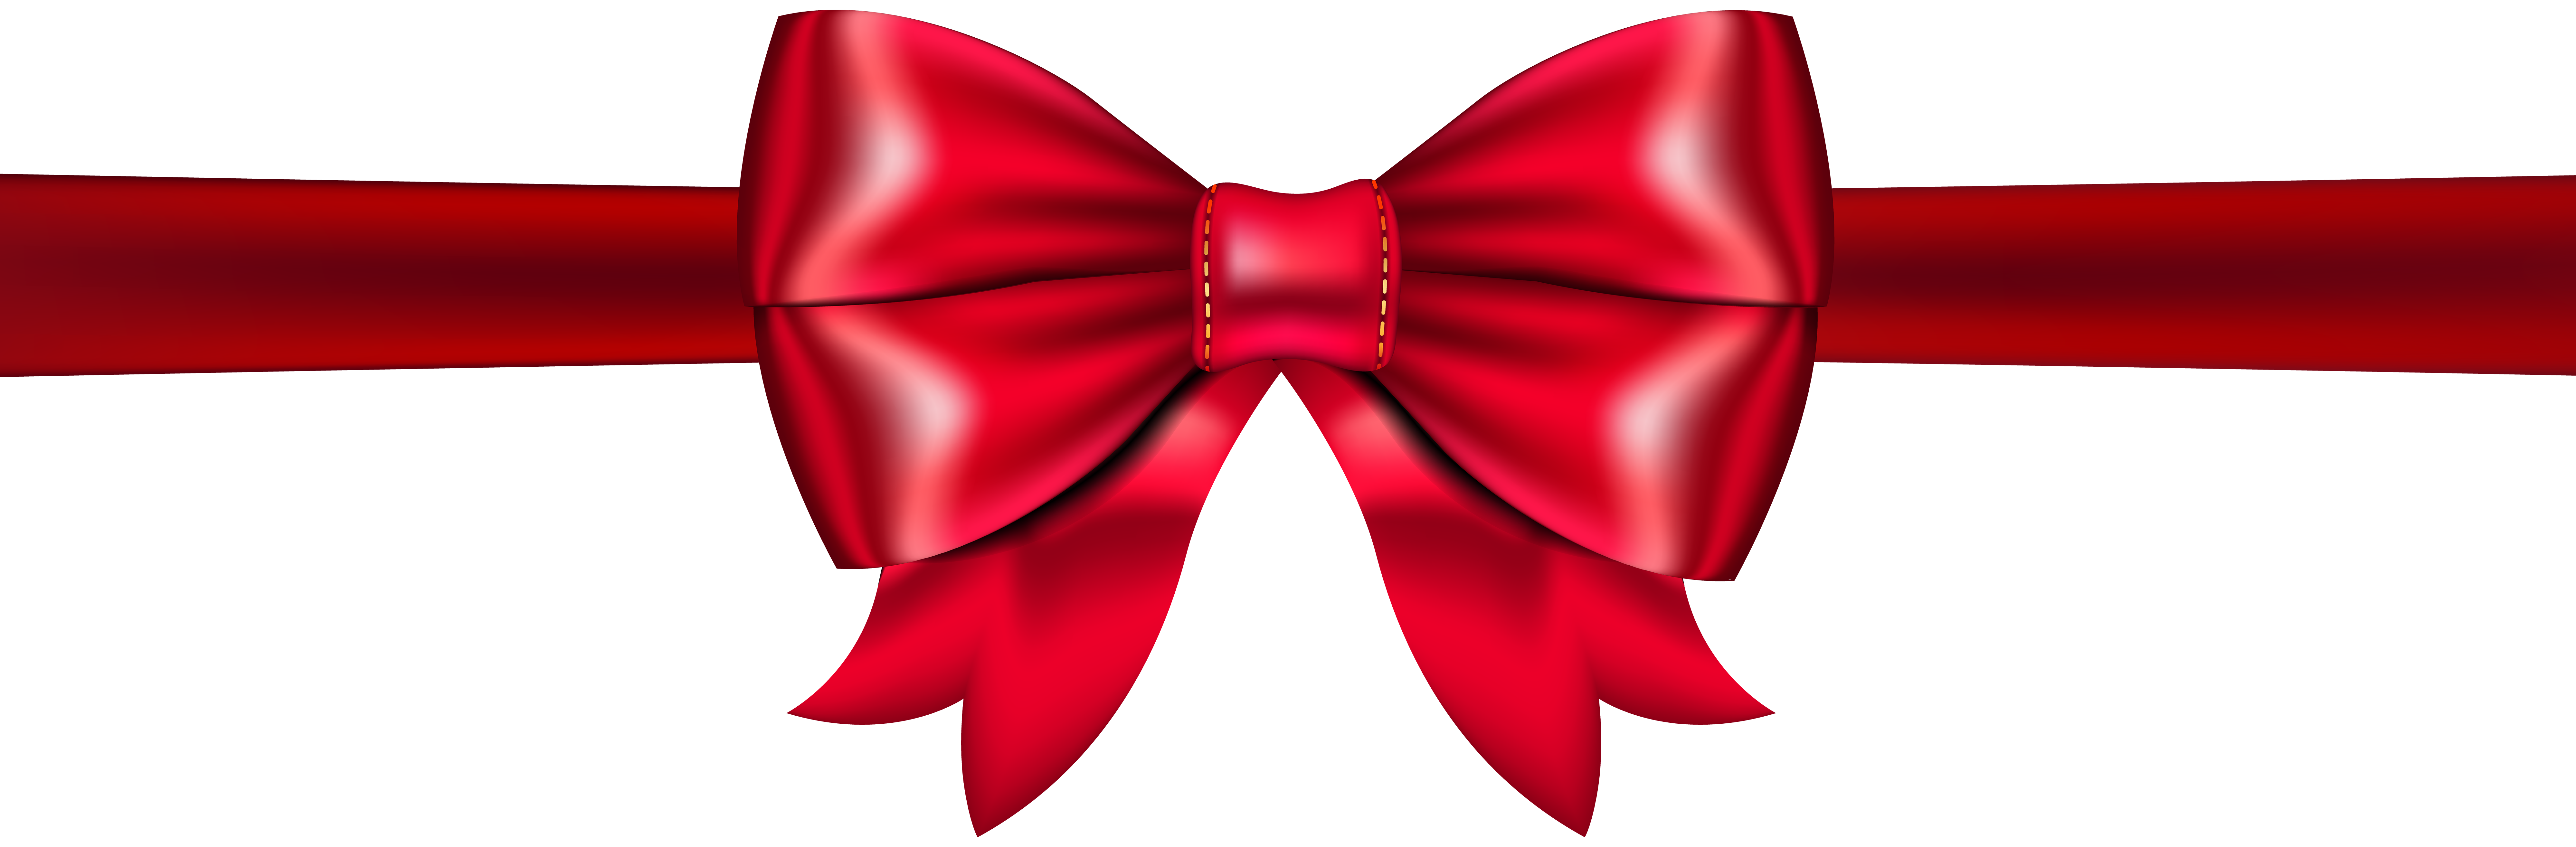 Red bow png sticker, cute